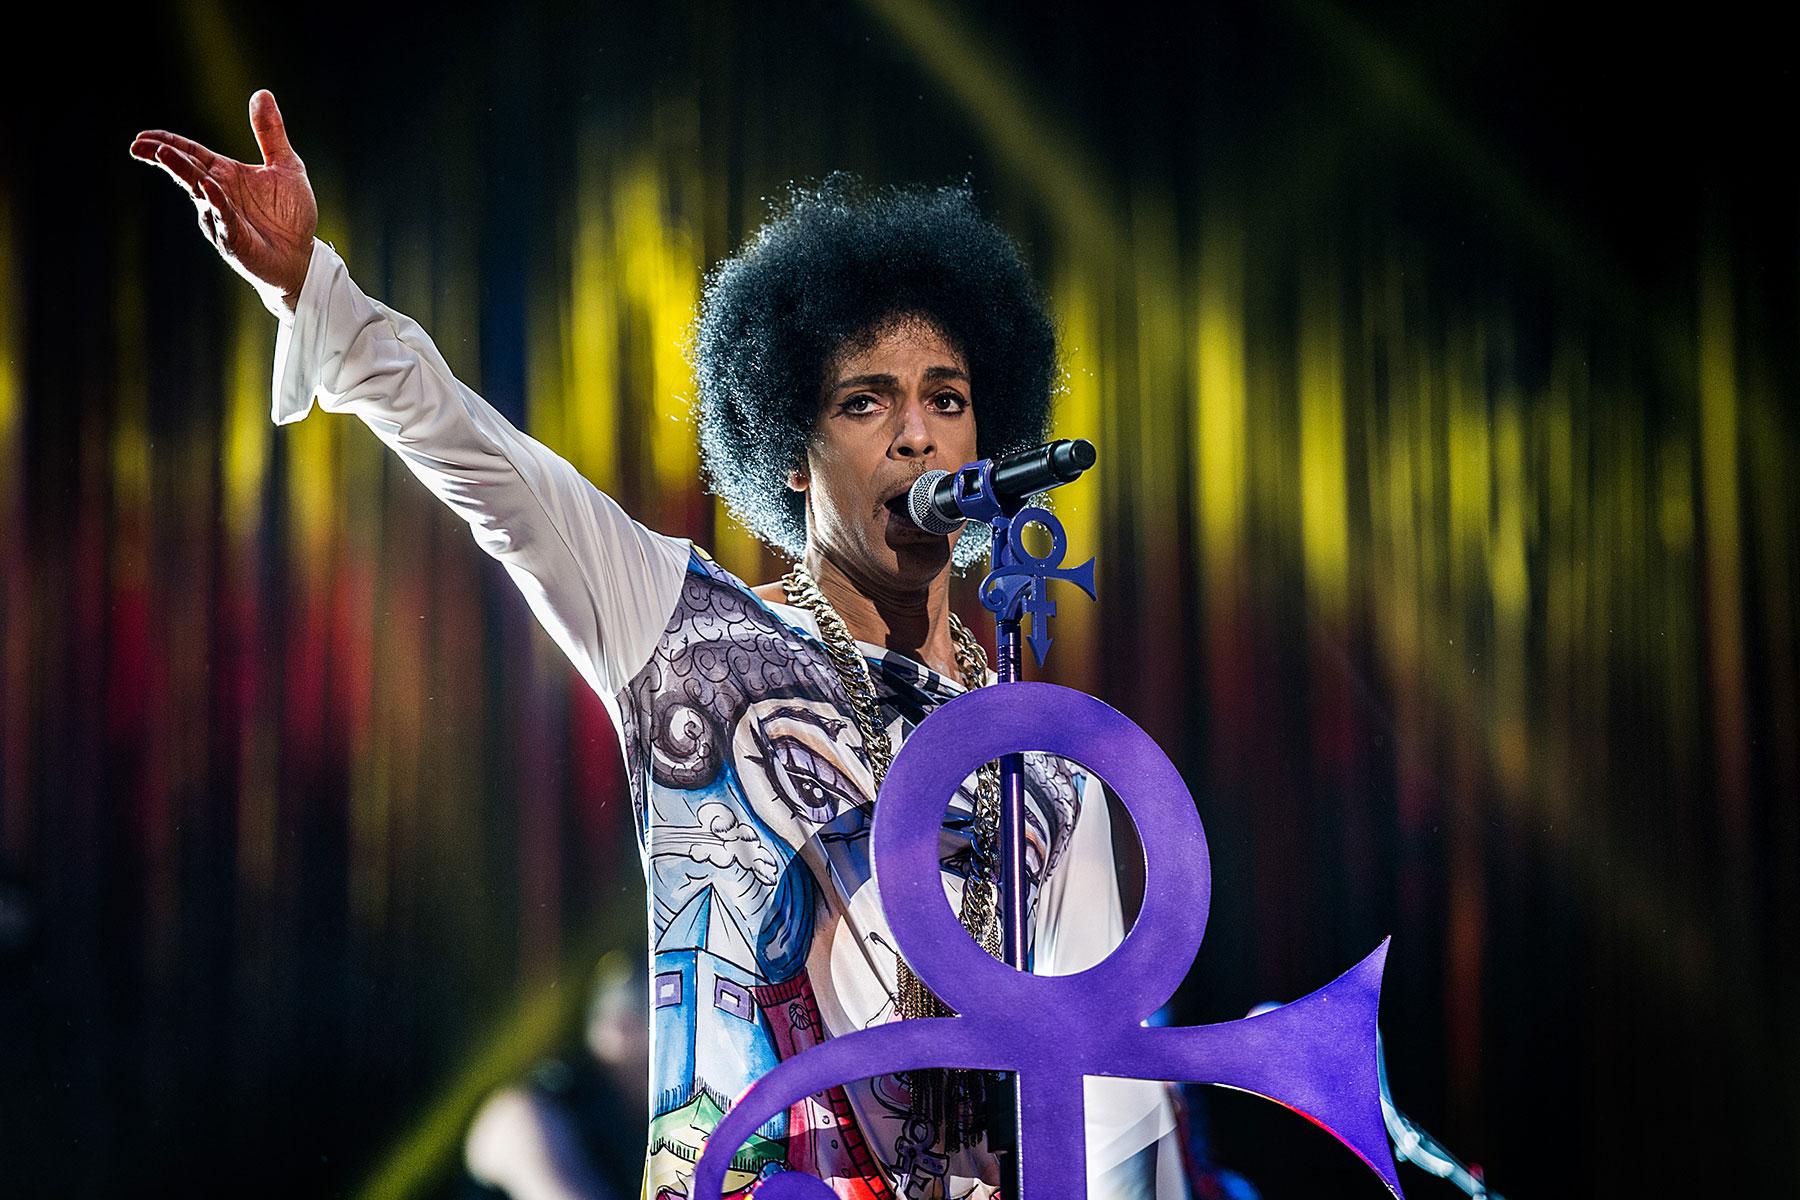 Prince to be honored with all-star Grammys tribute concert - www.hollywood.com - Los Angeles - county Clark - city Gary, county Clark